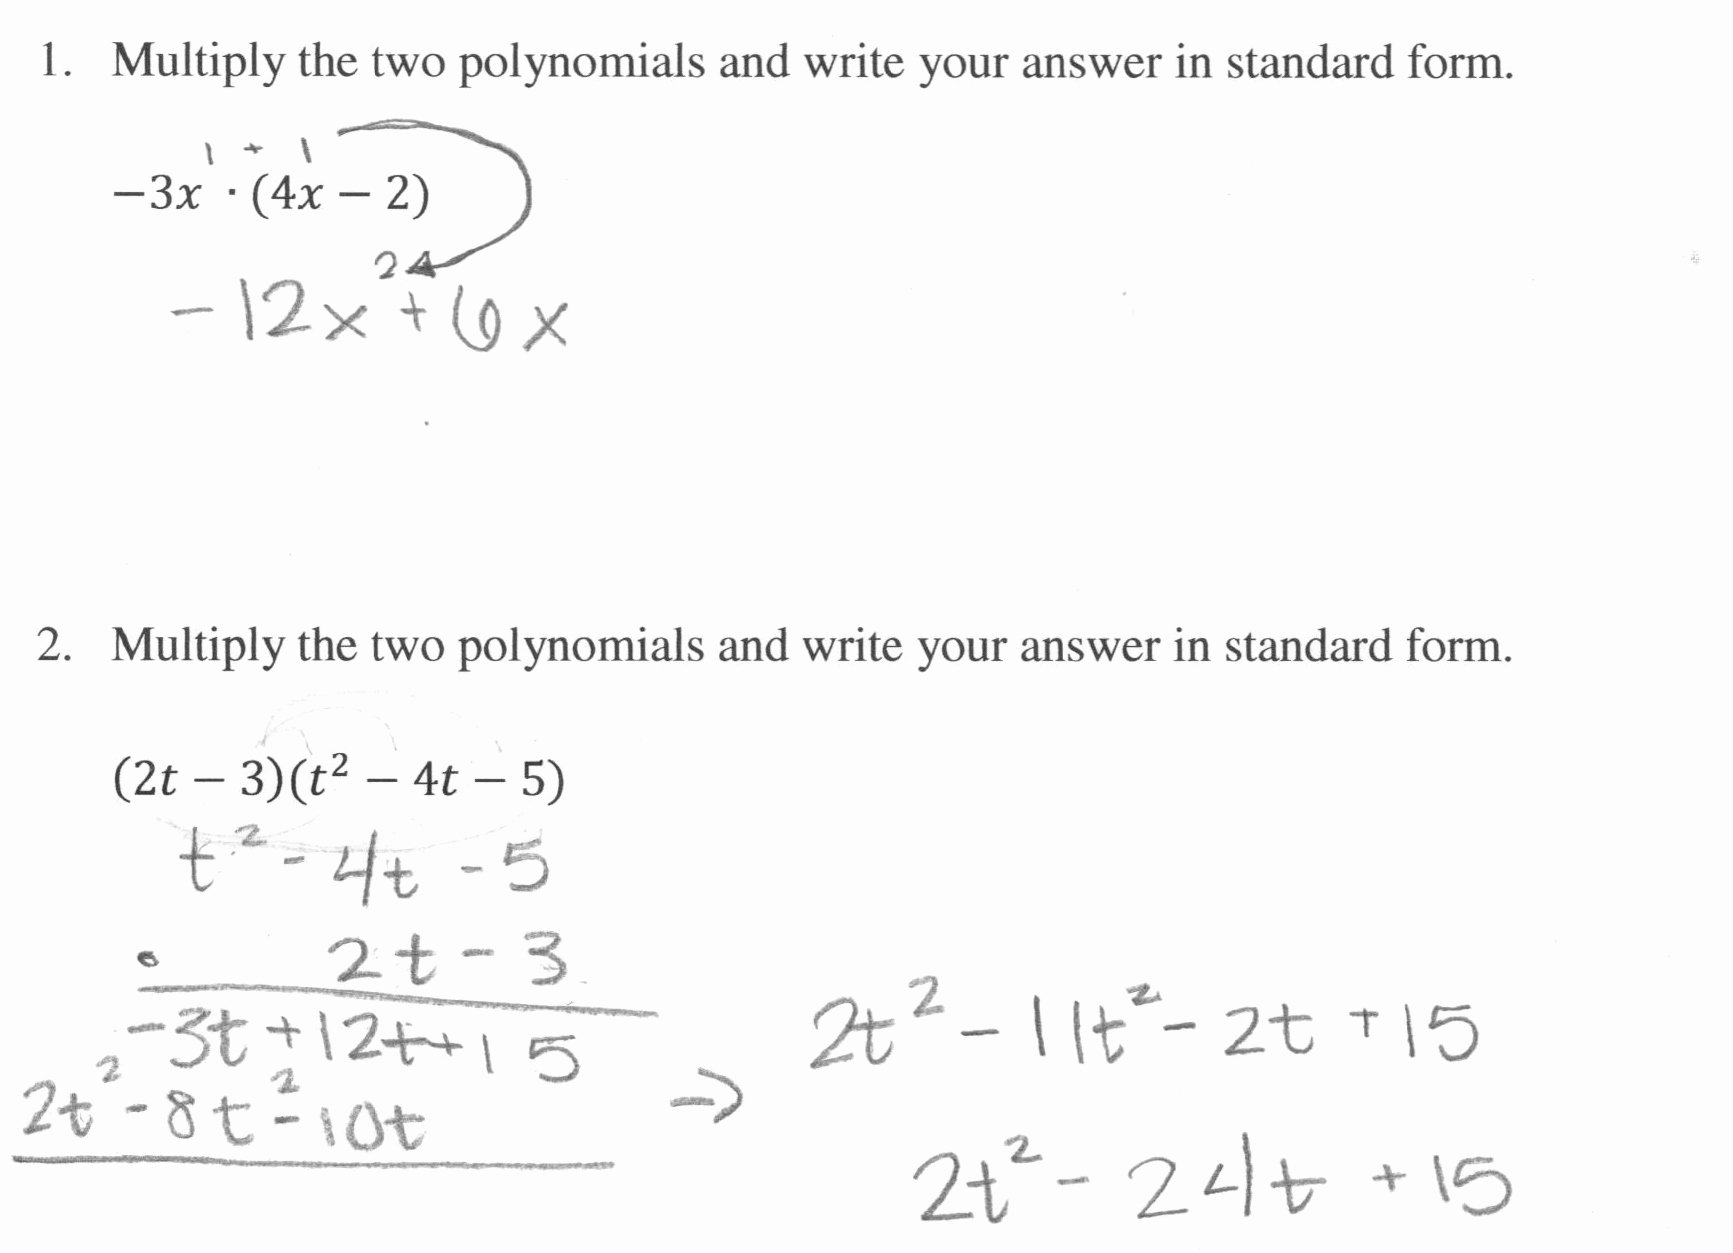 Multiplying Polynomials Worksheet 1 Answers New Multiplying Polynomials 1